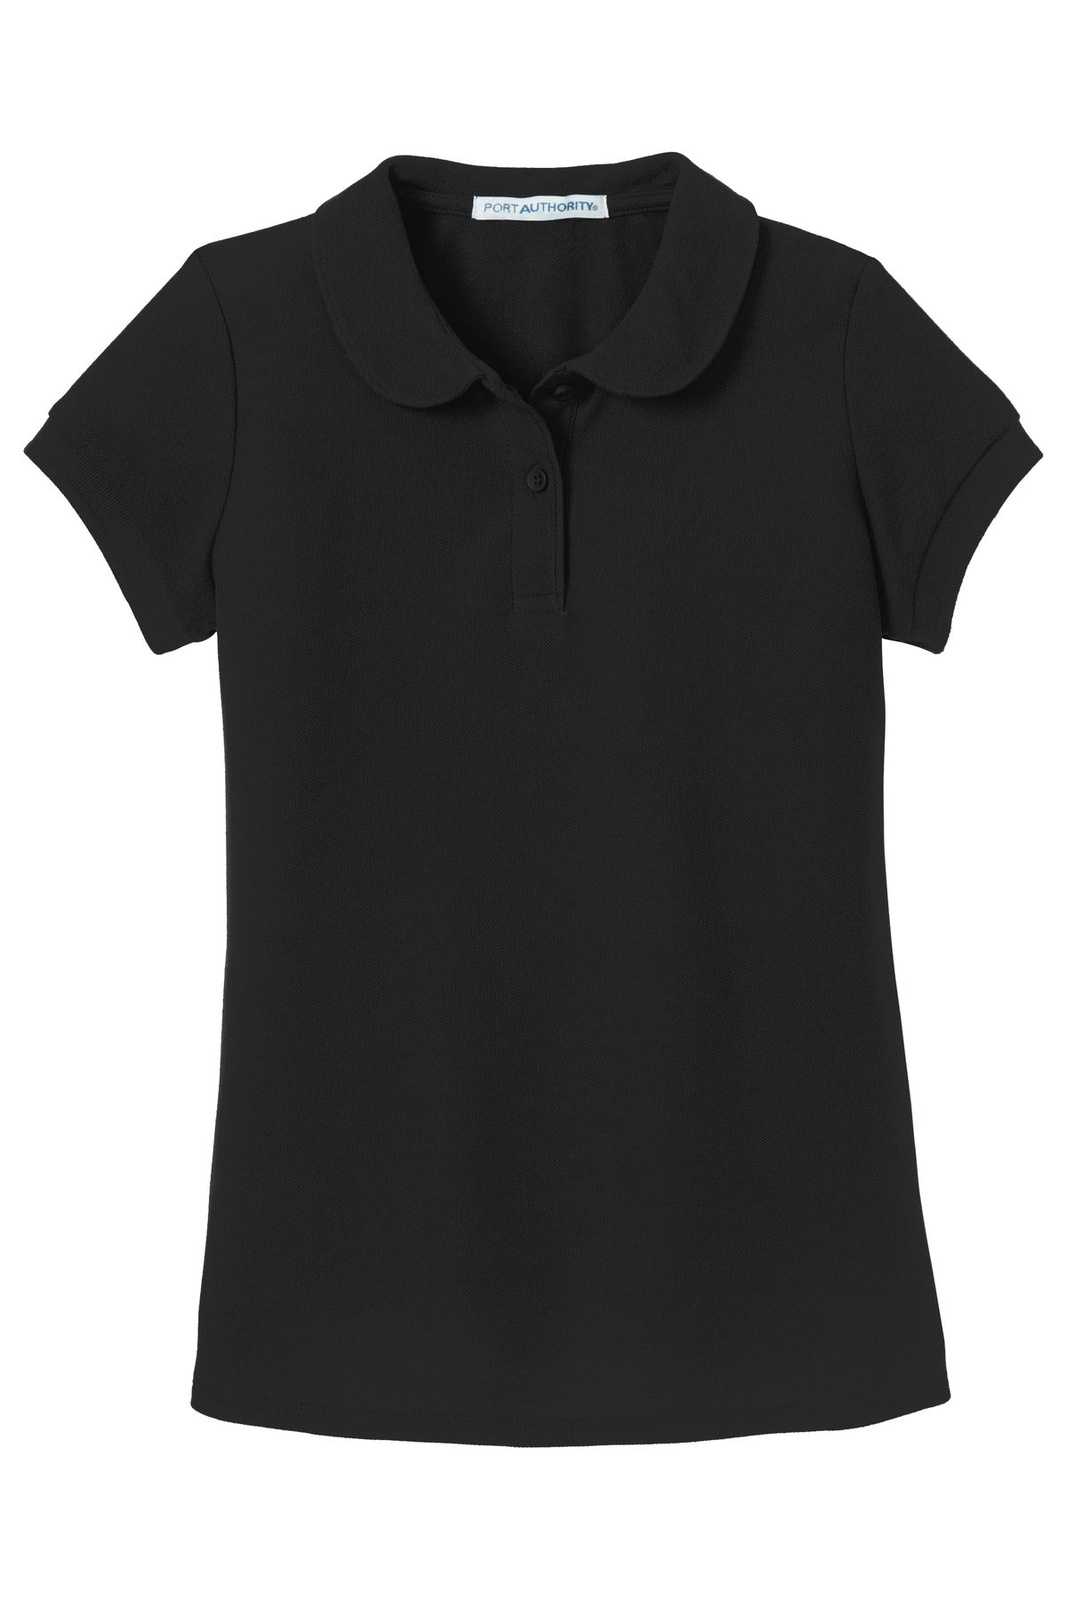 Port Authority YG503 Girls Silk Touch Peter Pan Collar Polo - Black - HIT a Double - 5